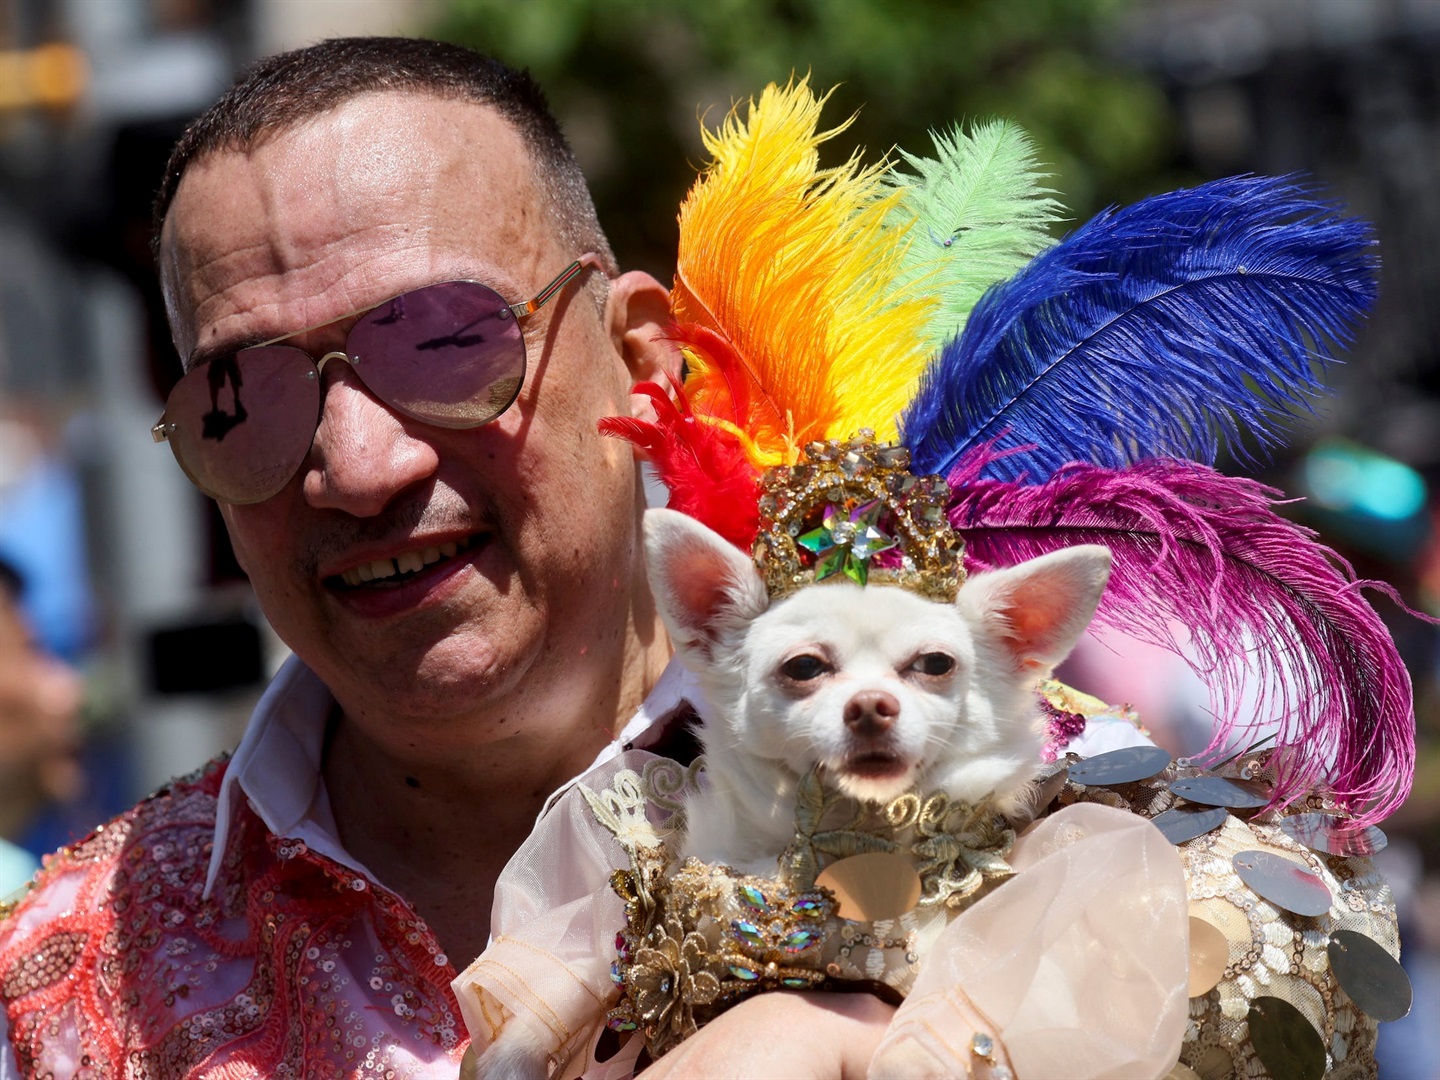 A person holds a dog at the 2022 NYC Pride parade, in New York City, on June 26, 2022. Brendan McDermid/Reuters